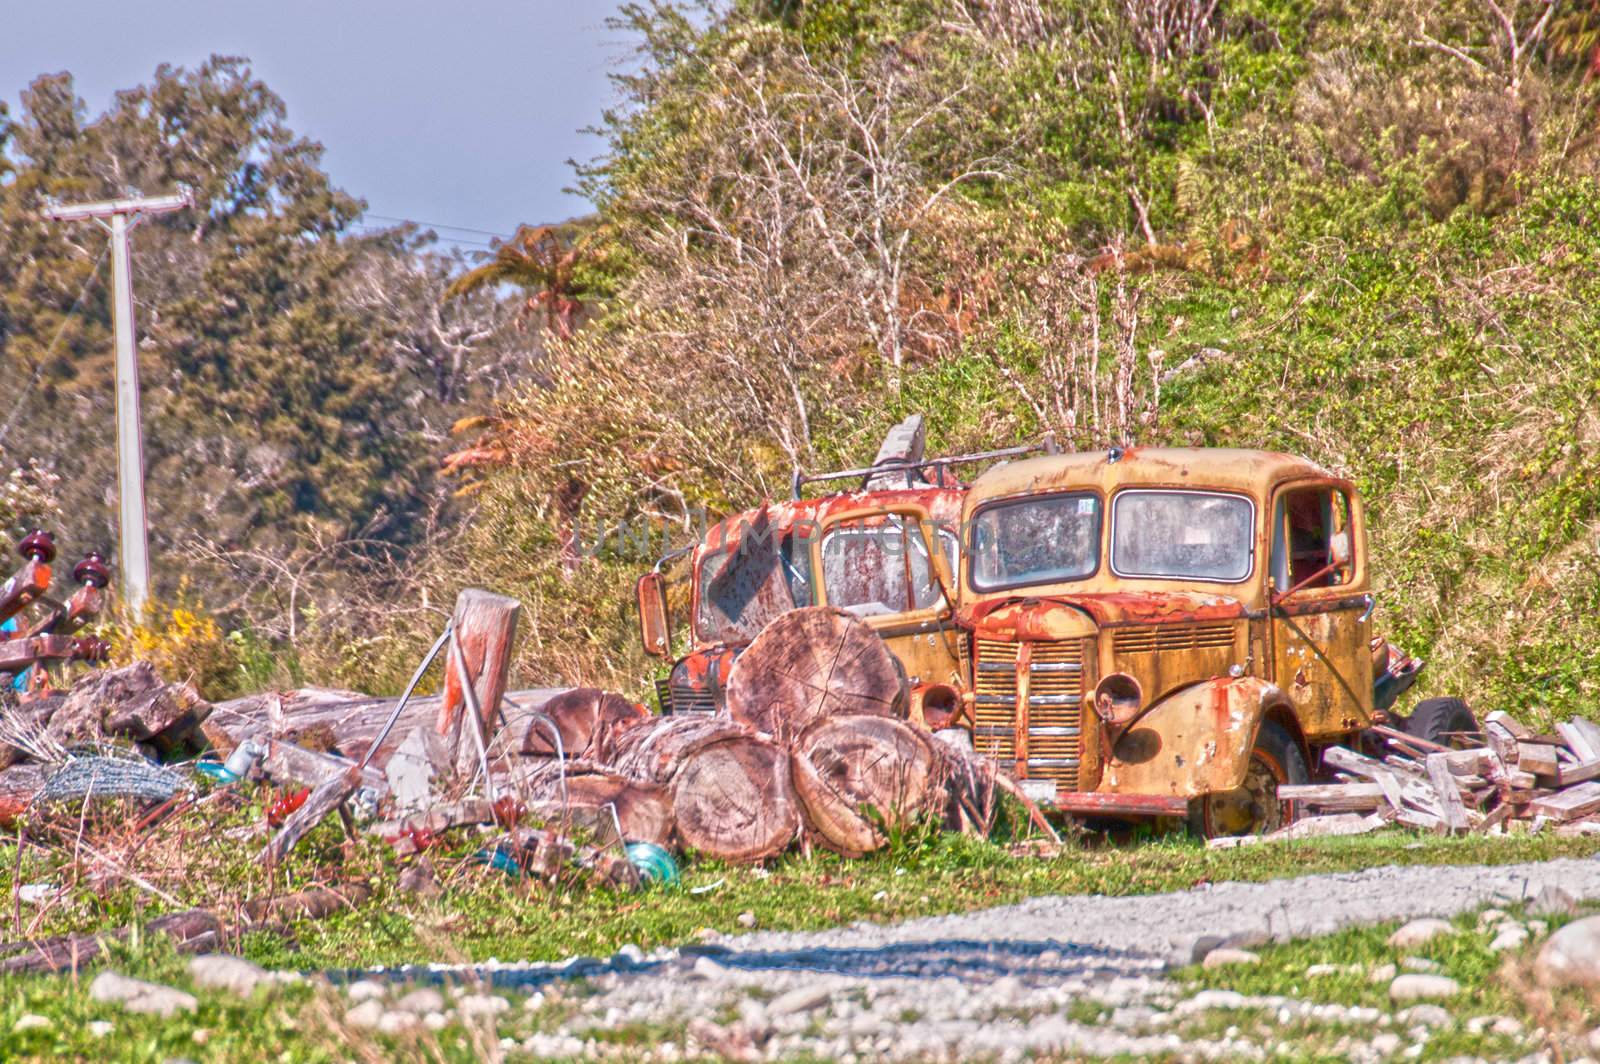 Abandoned Truck int he New Zealand Countryside.